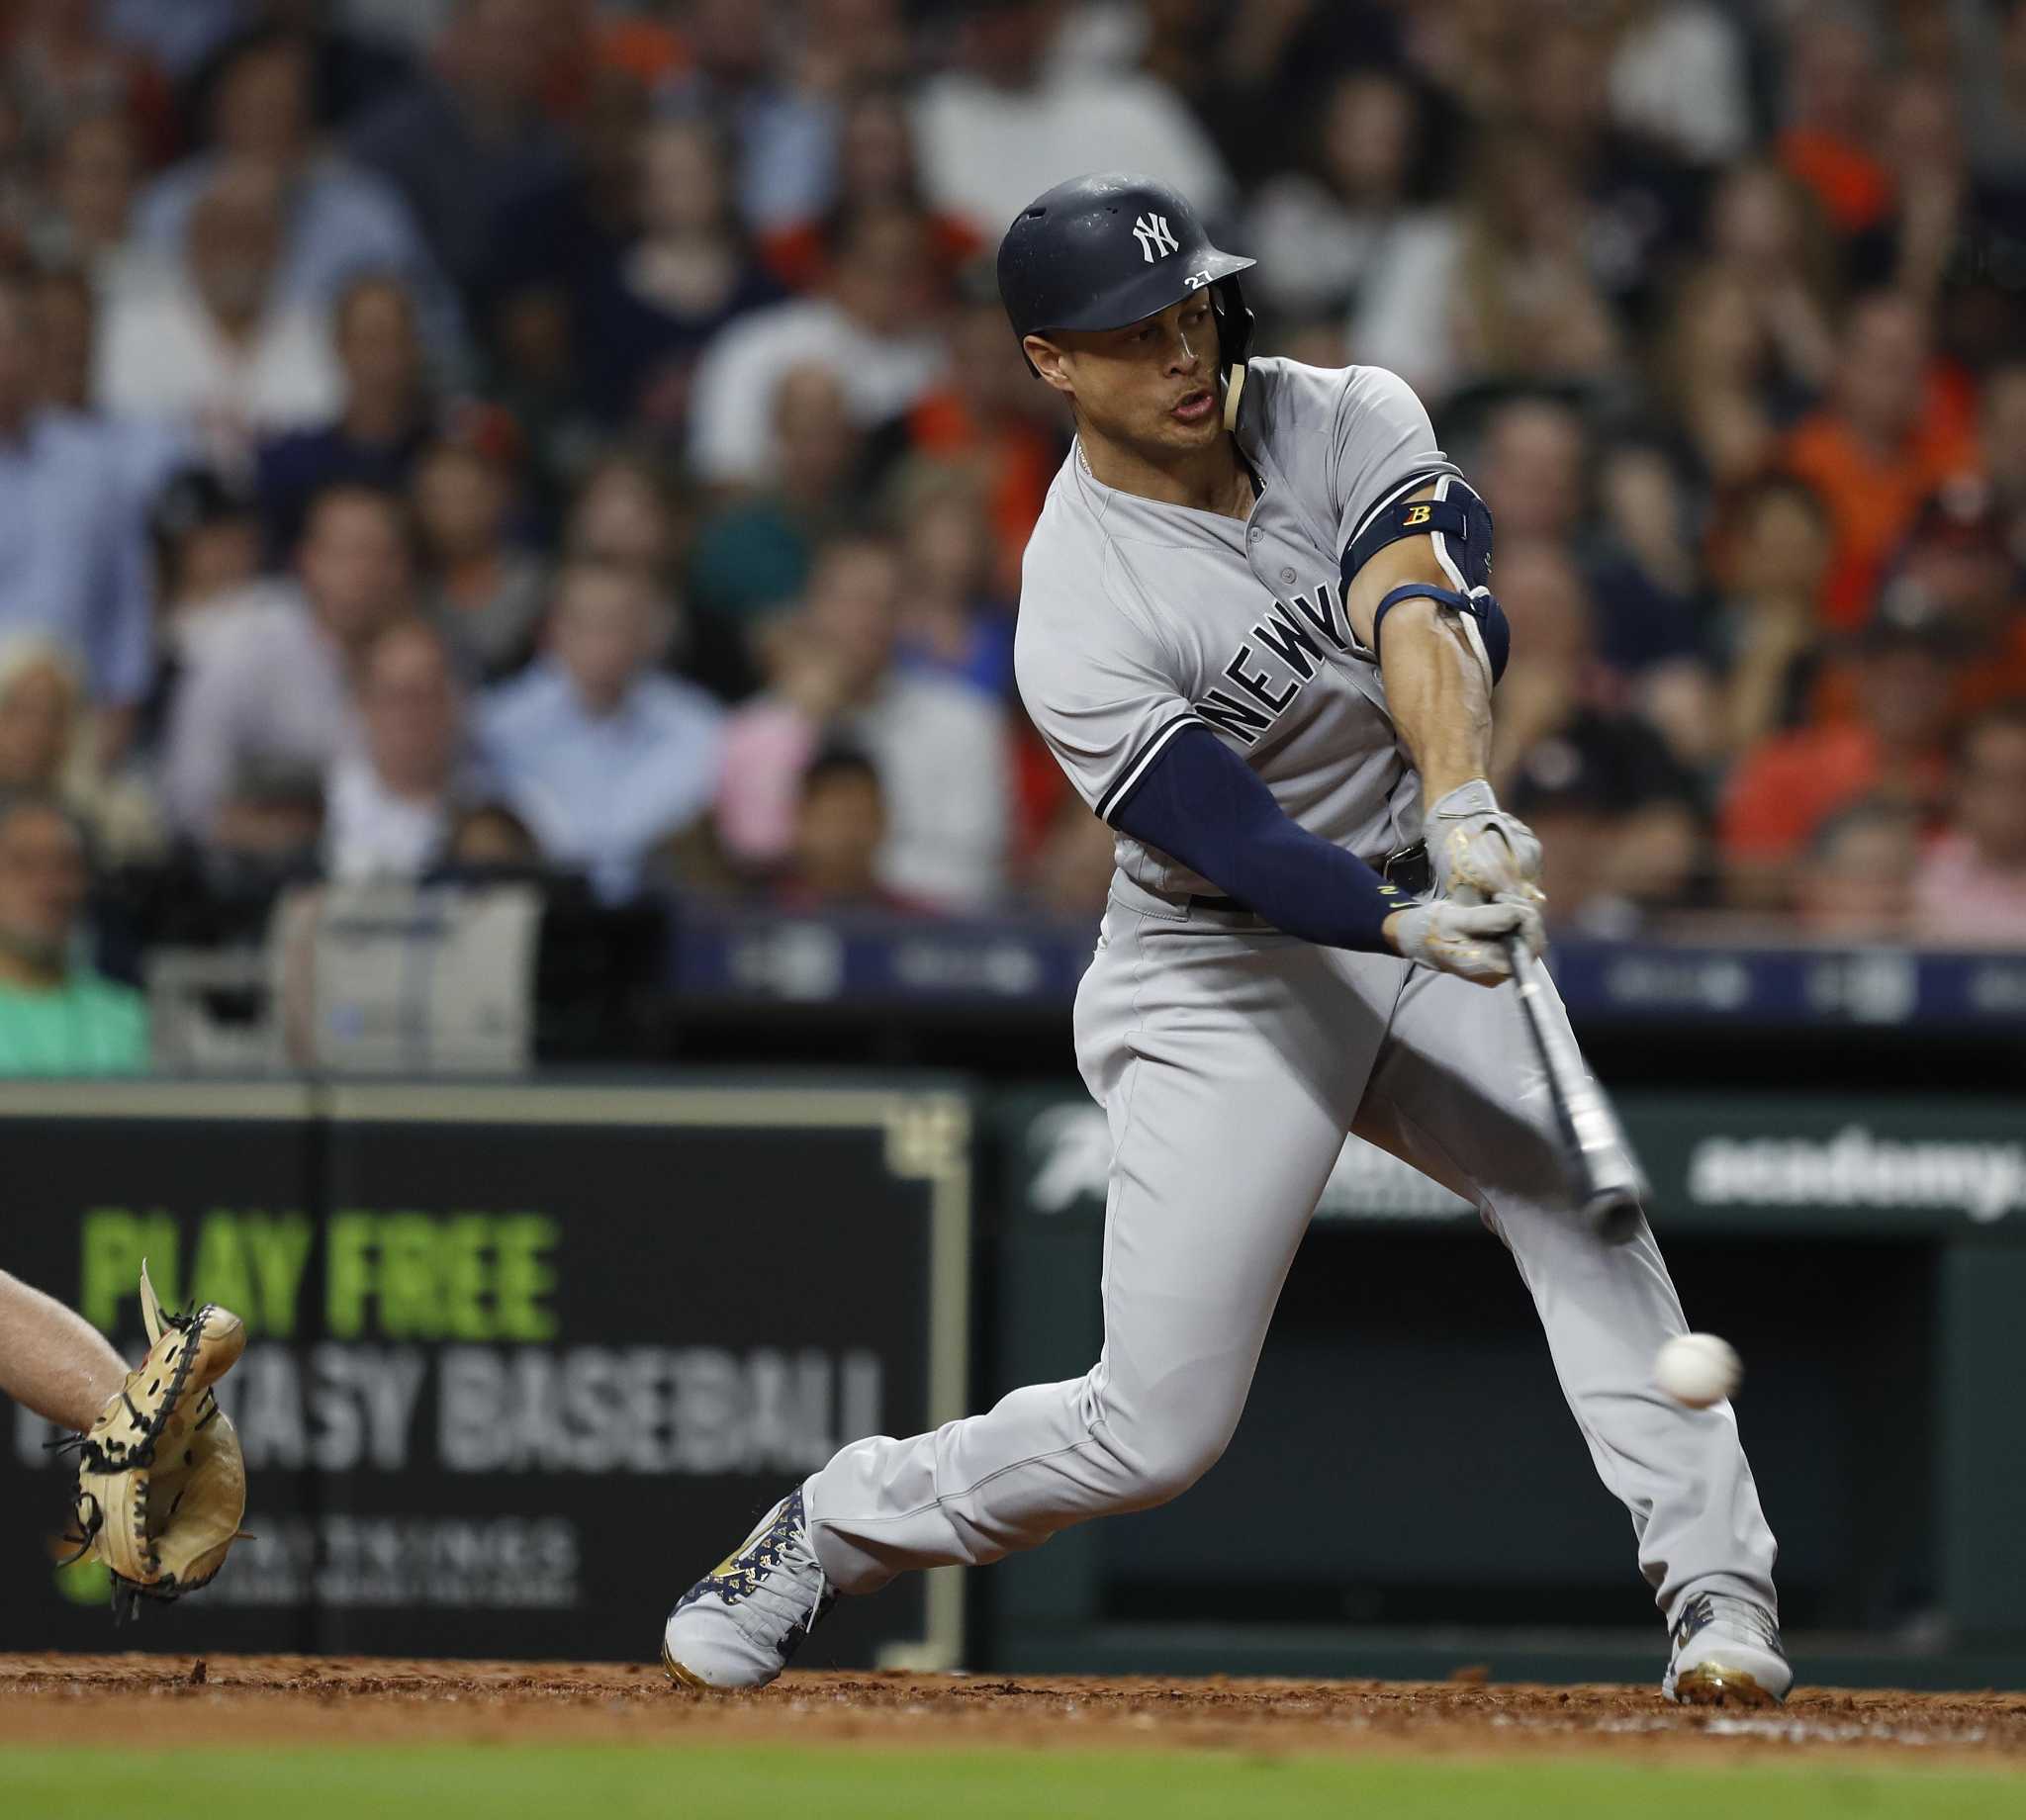 Strikeouts at heart of Stanton's struggles